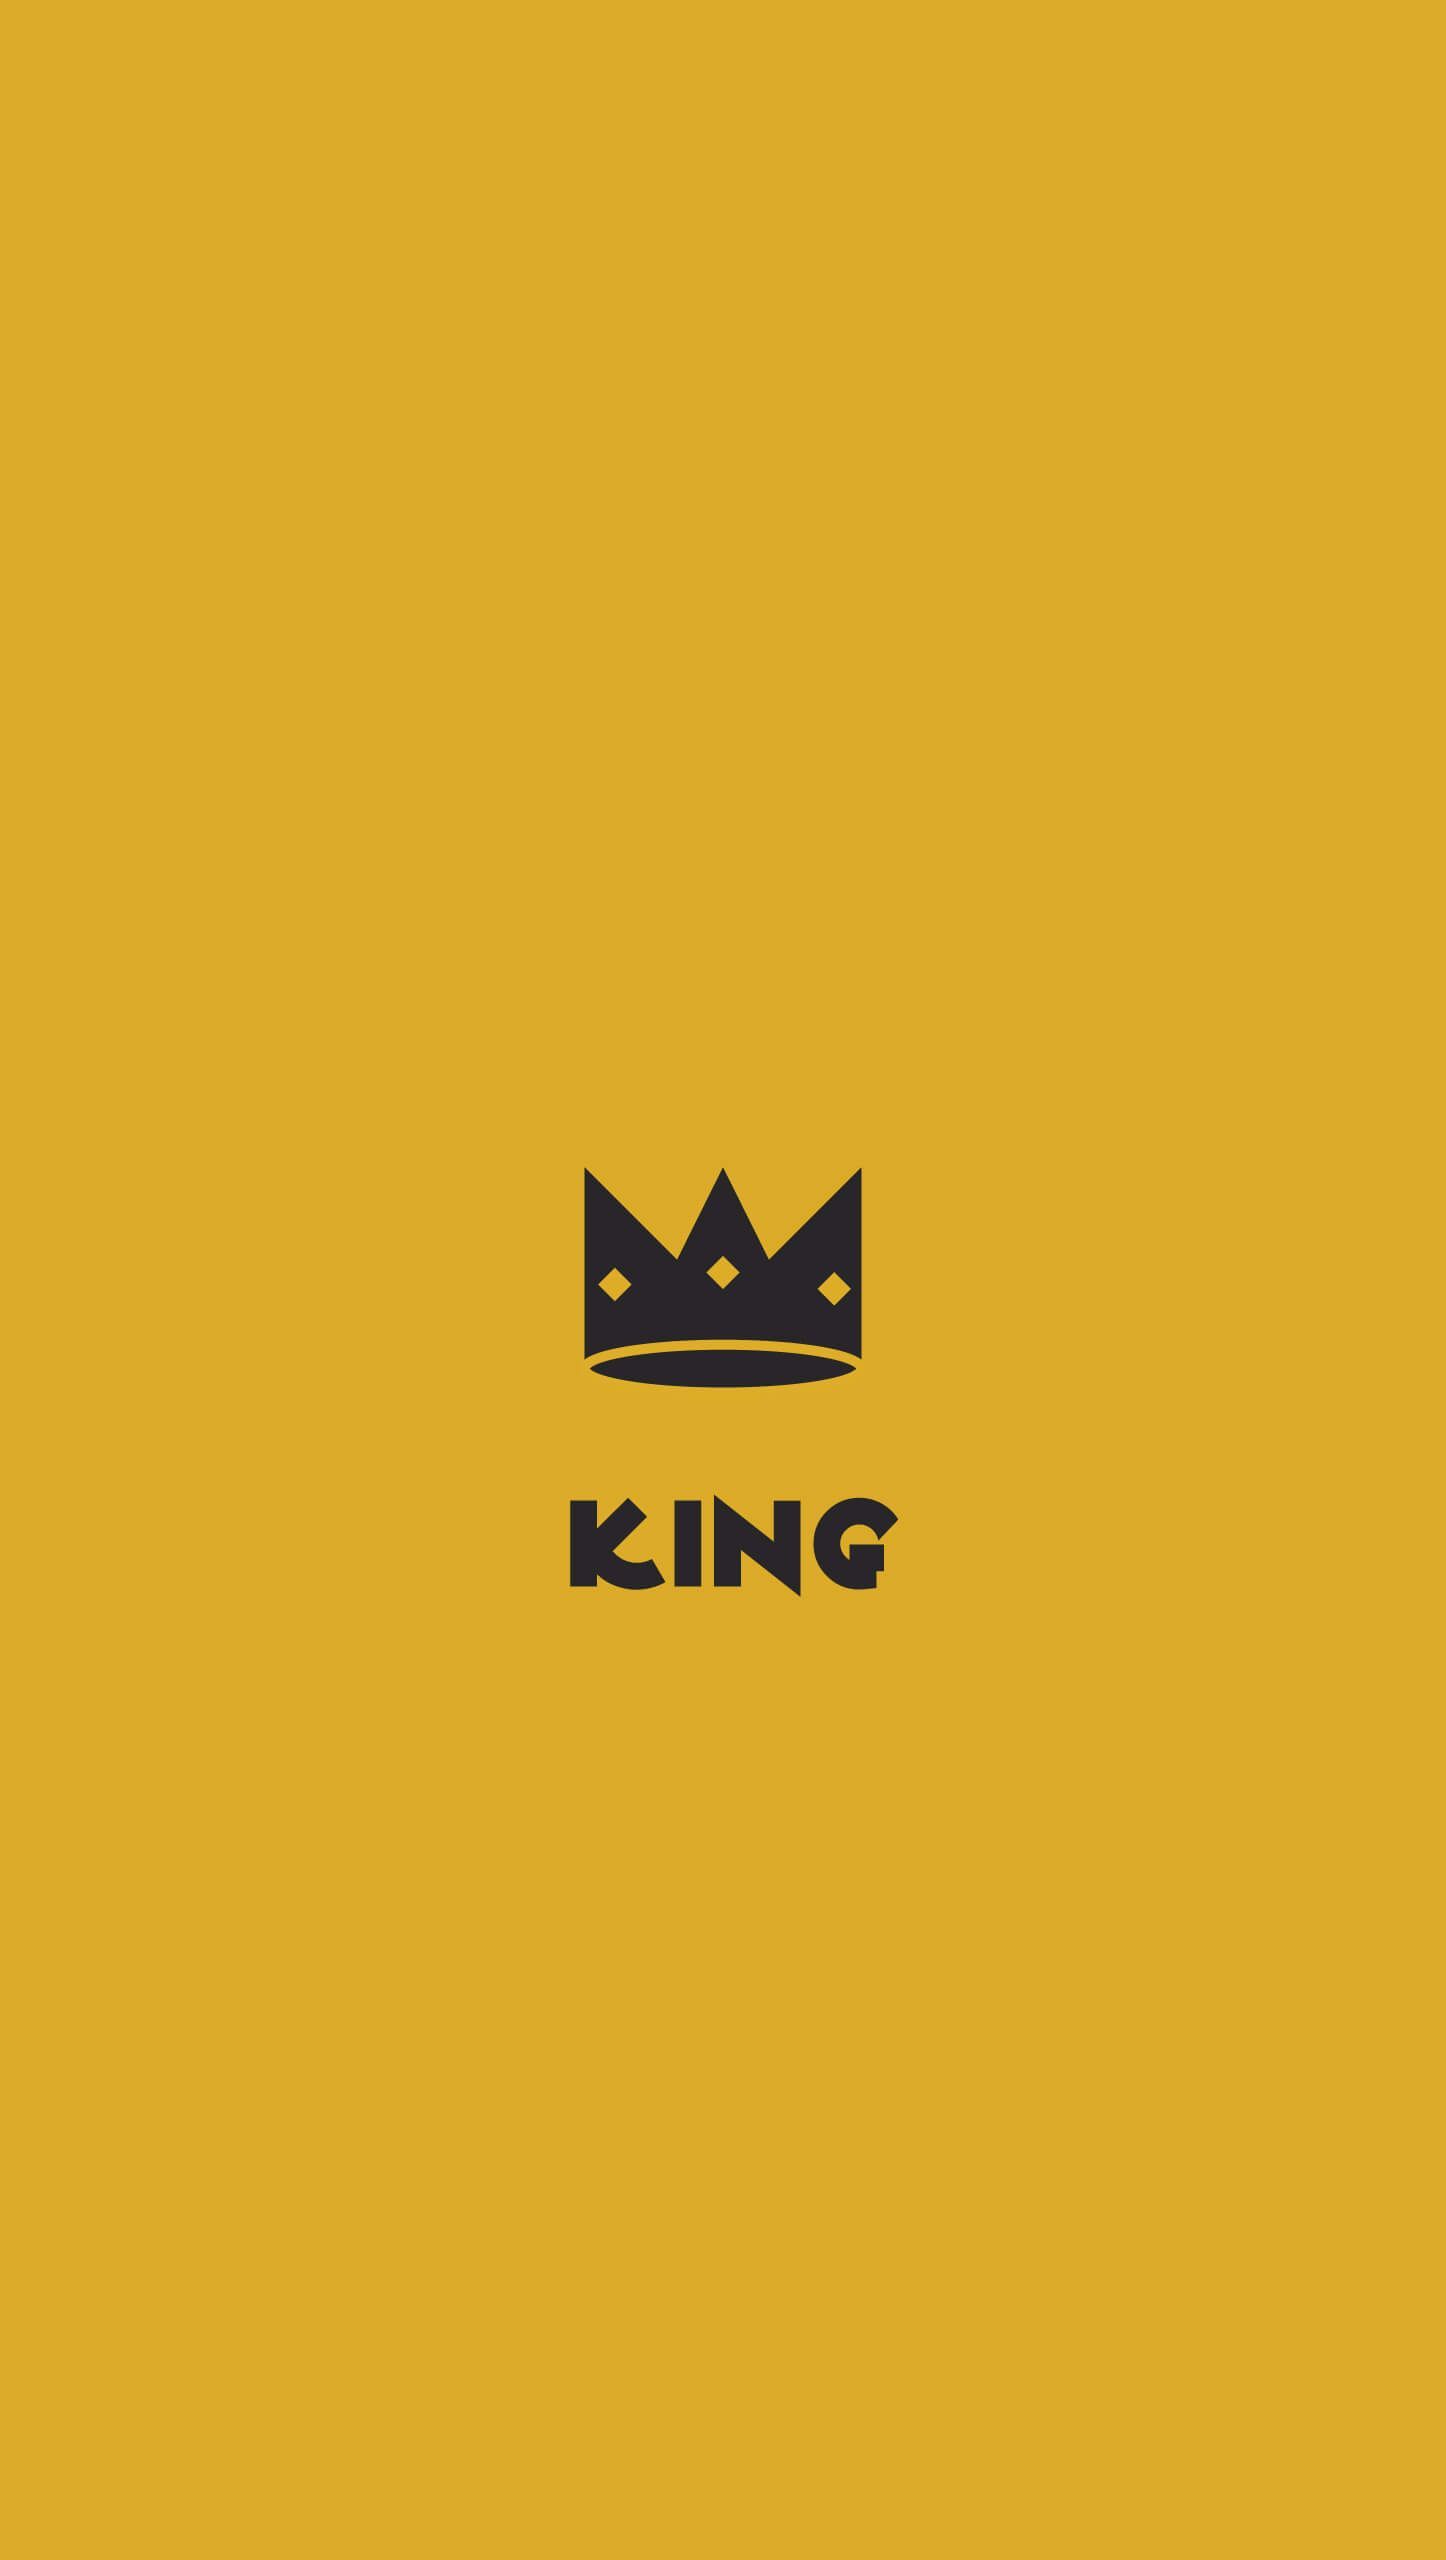 King Wallpapers For Phone  iPhone  Best Wallpapers